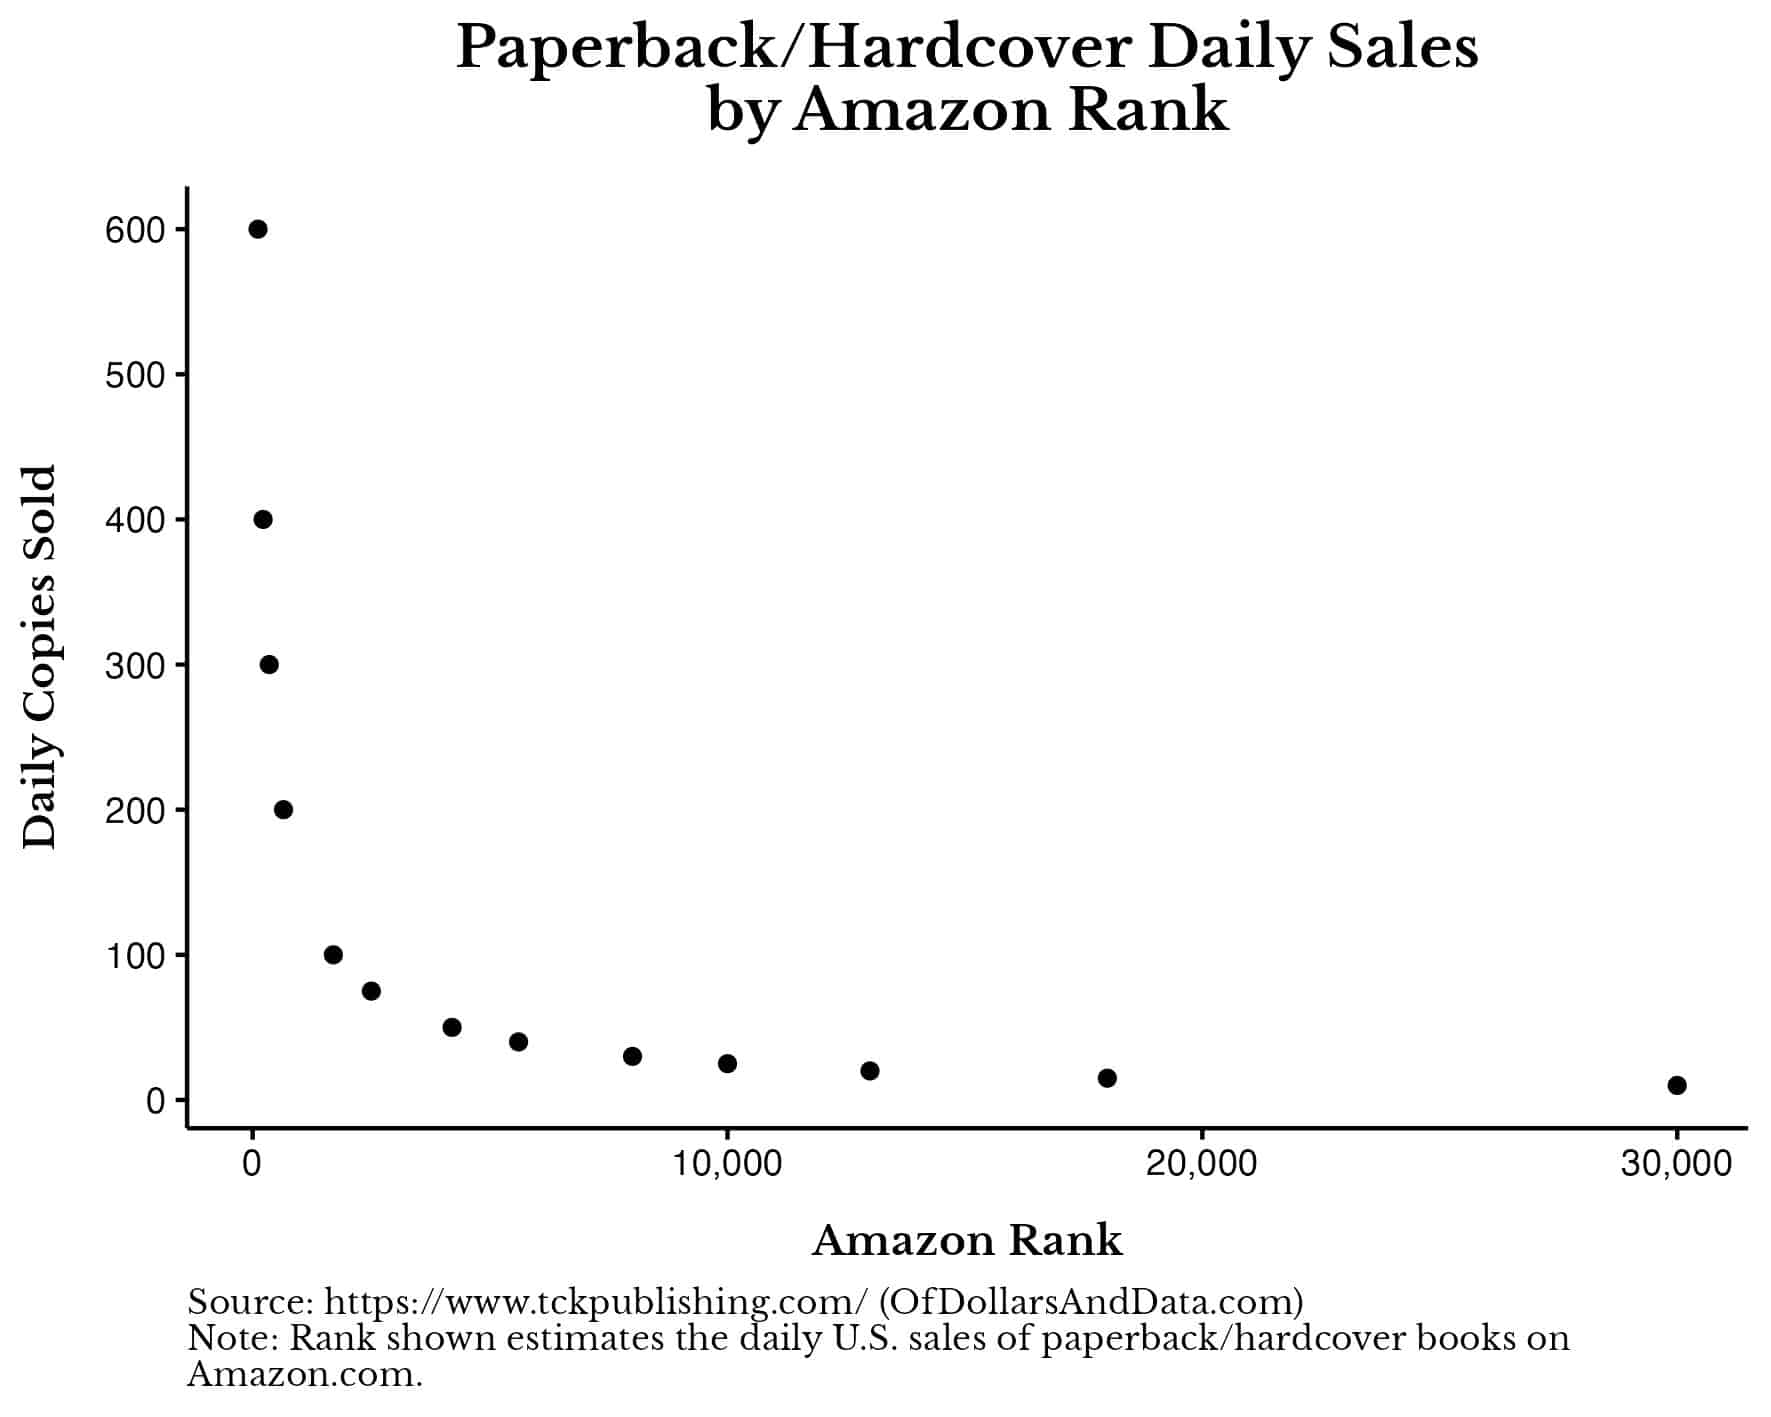 Chart of Amazon book rank vs daily hardcover/paperback sales.